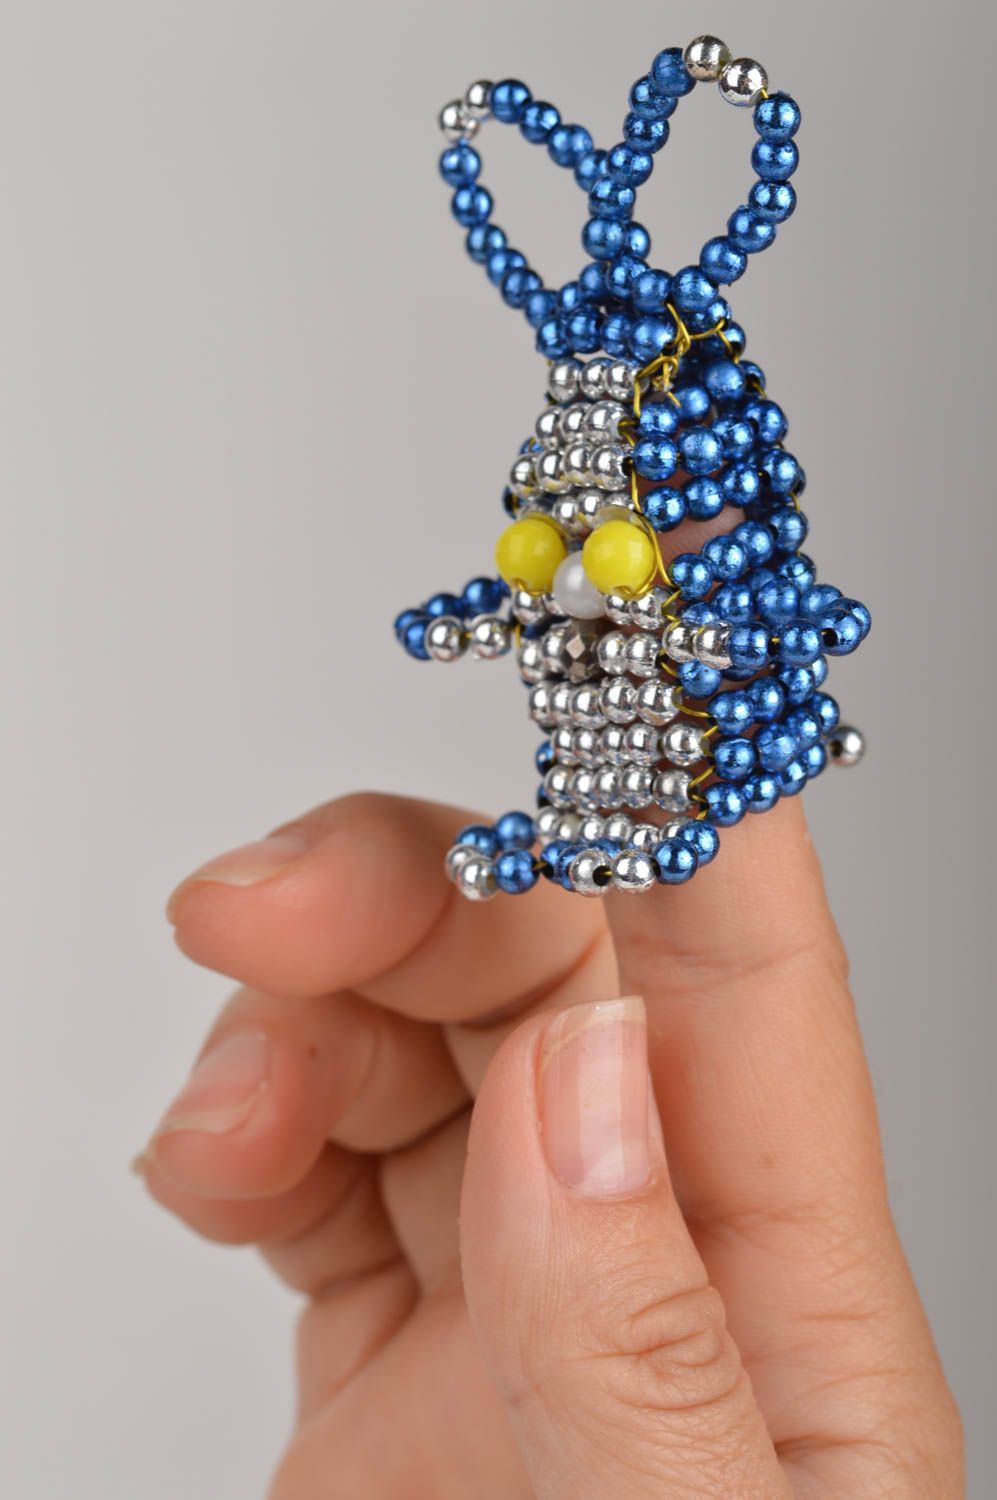 Handmade finger toy rabbit made of the Chinese beads for puppet theater photo 3